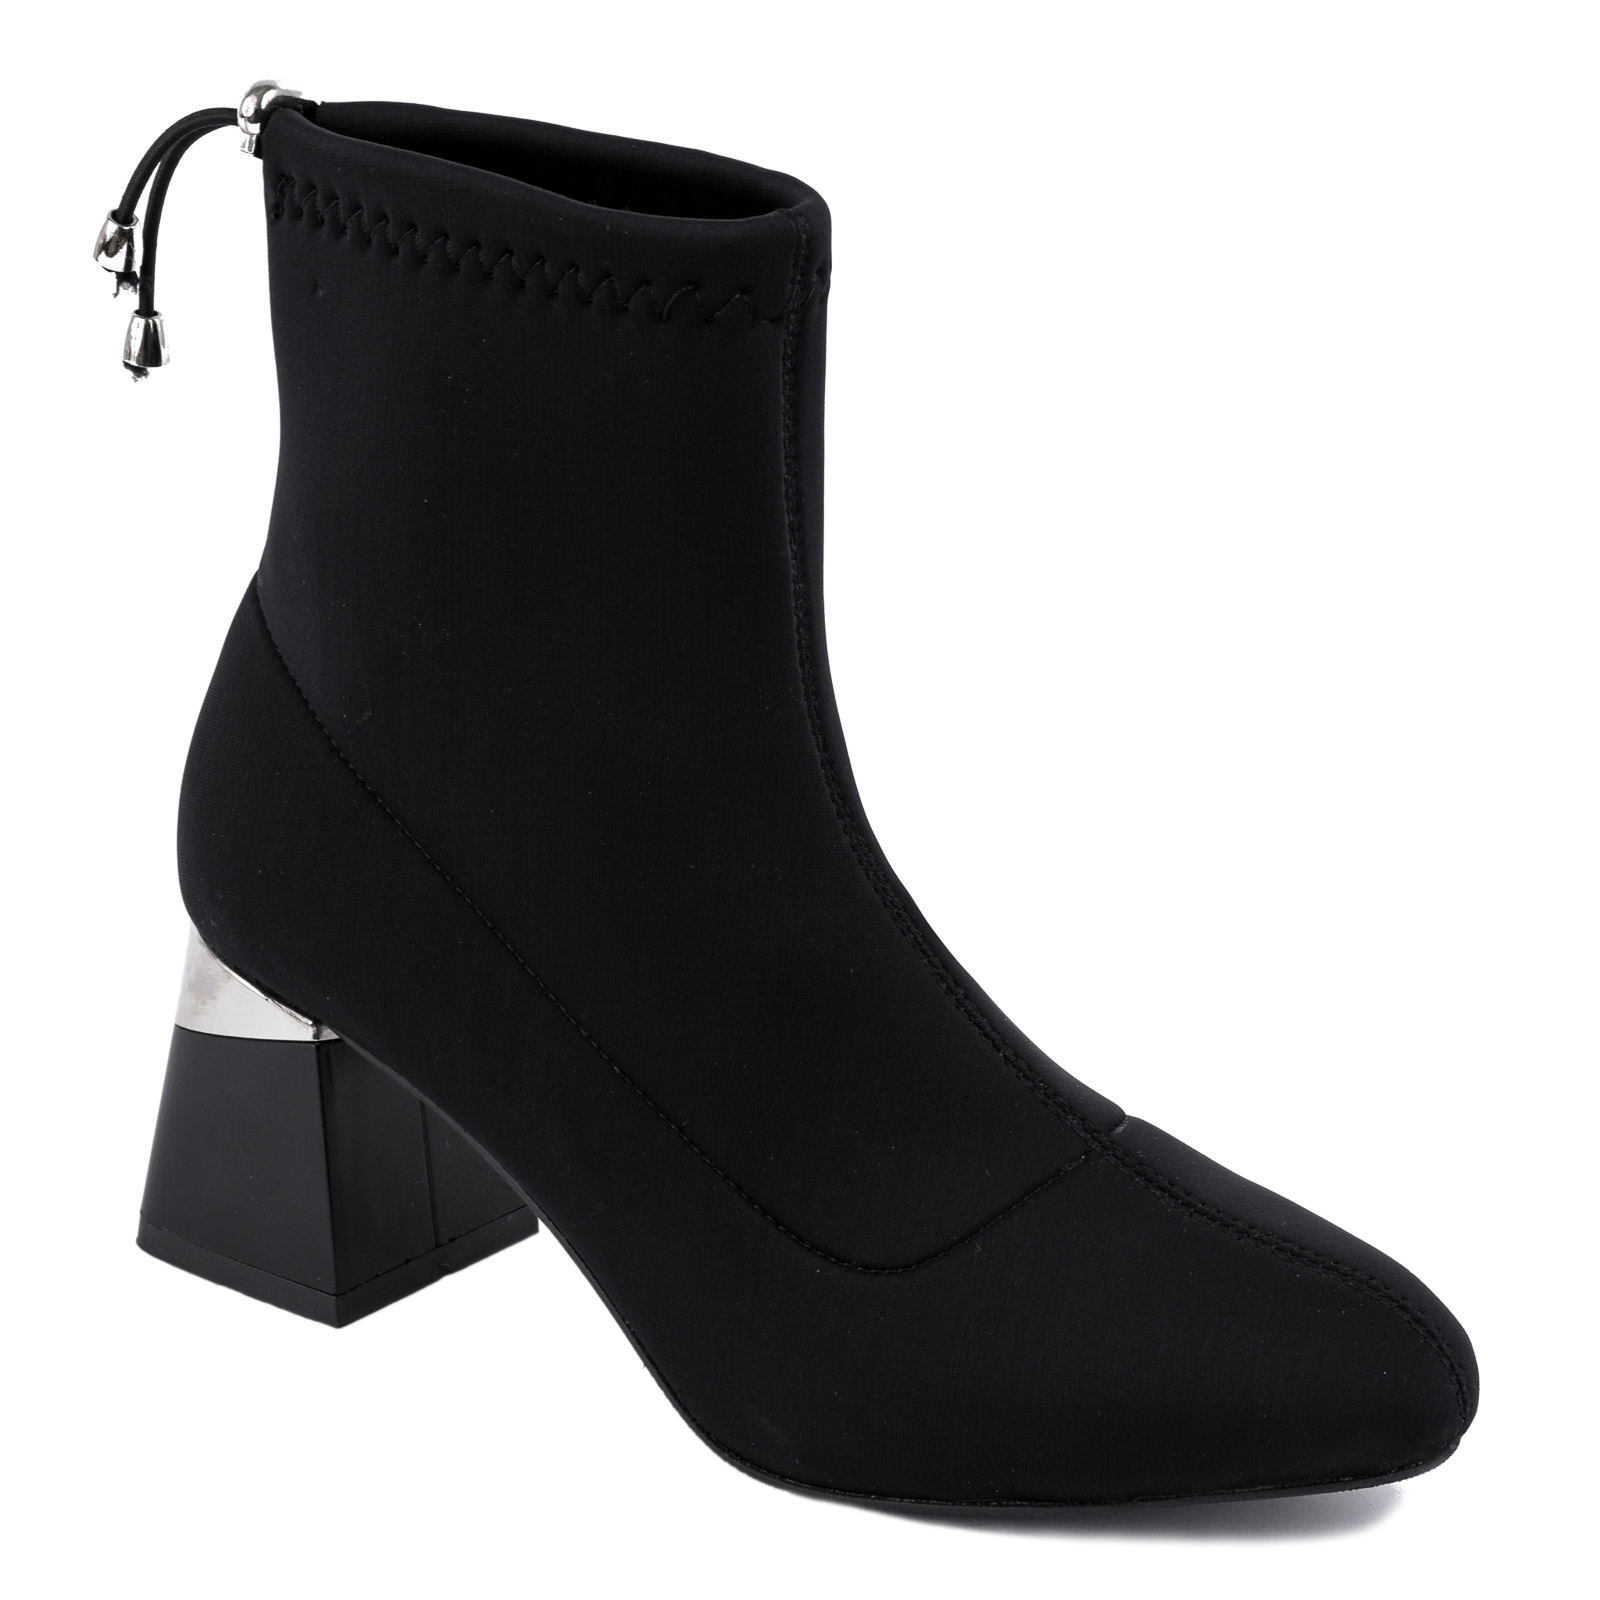 NEOPRENE ANKLE BOOTS WITH LACES AND THICK HEEL - BLACK